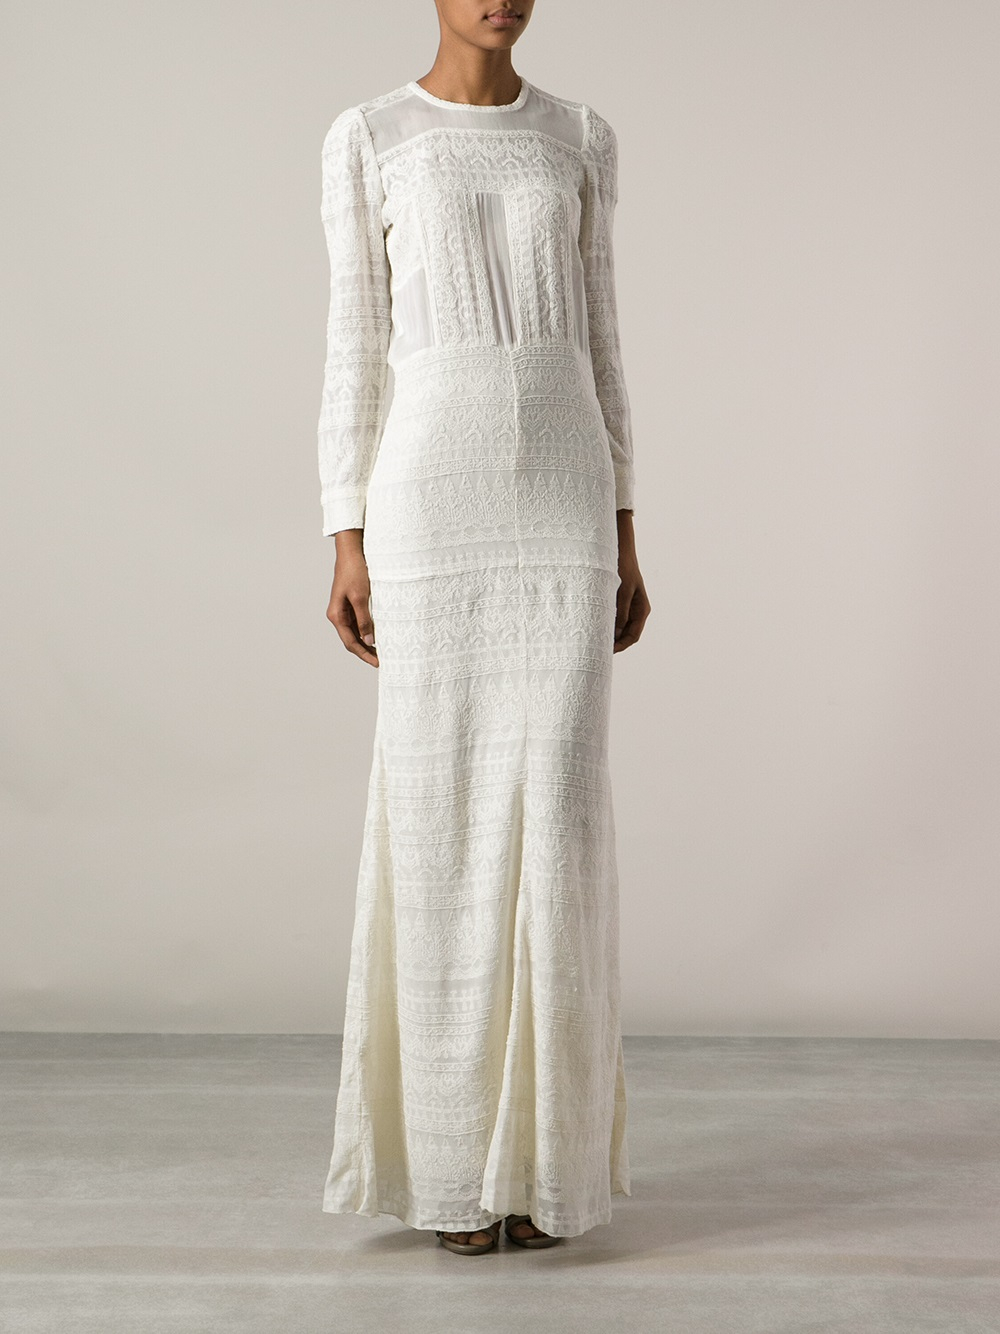 Isabel Marant Lace Maxi Dress in White - Lyst